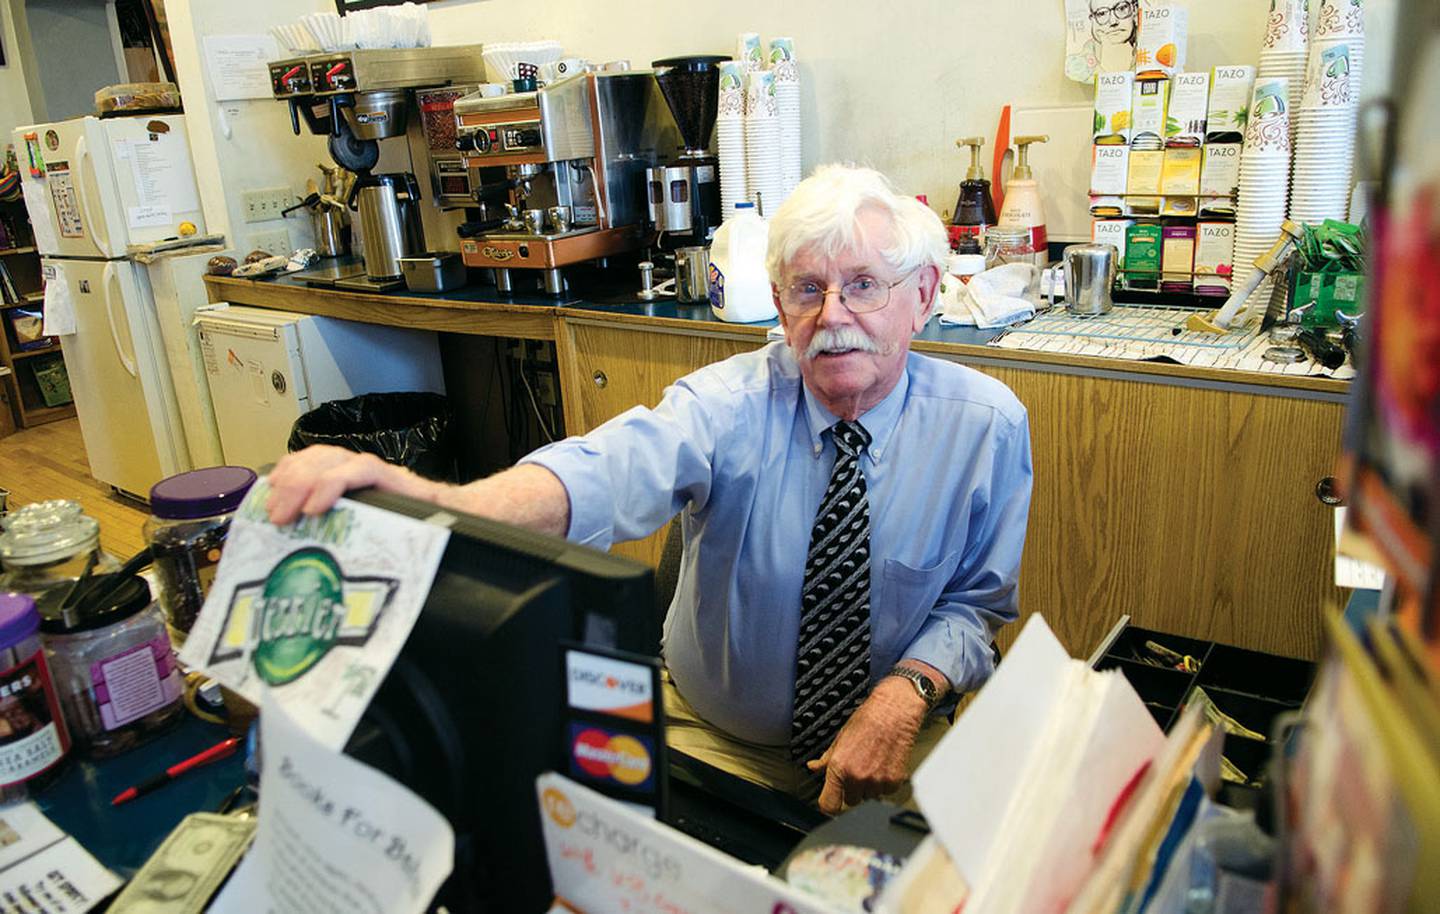 Books on First owner Larry Dunphy says he works a lot of hours, "but hell, everyone works a lot of hours, whether you own a business or not." And the "destination" book store has been open the same hours every week since it opened in 1998.